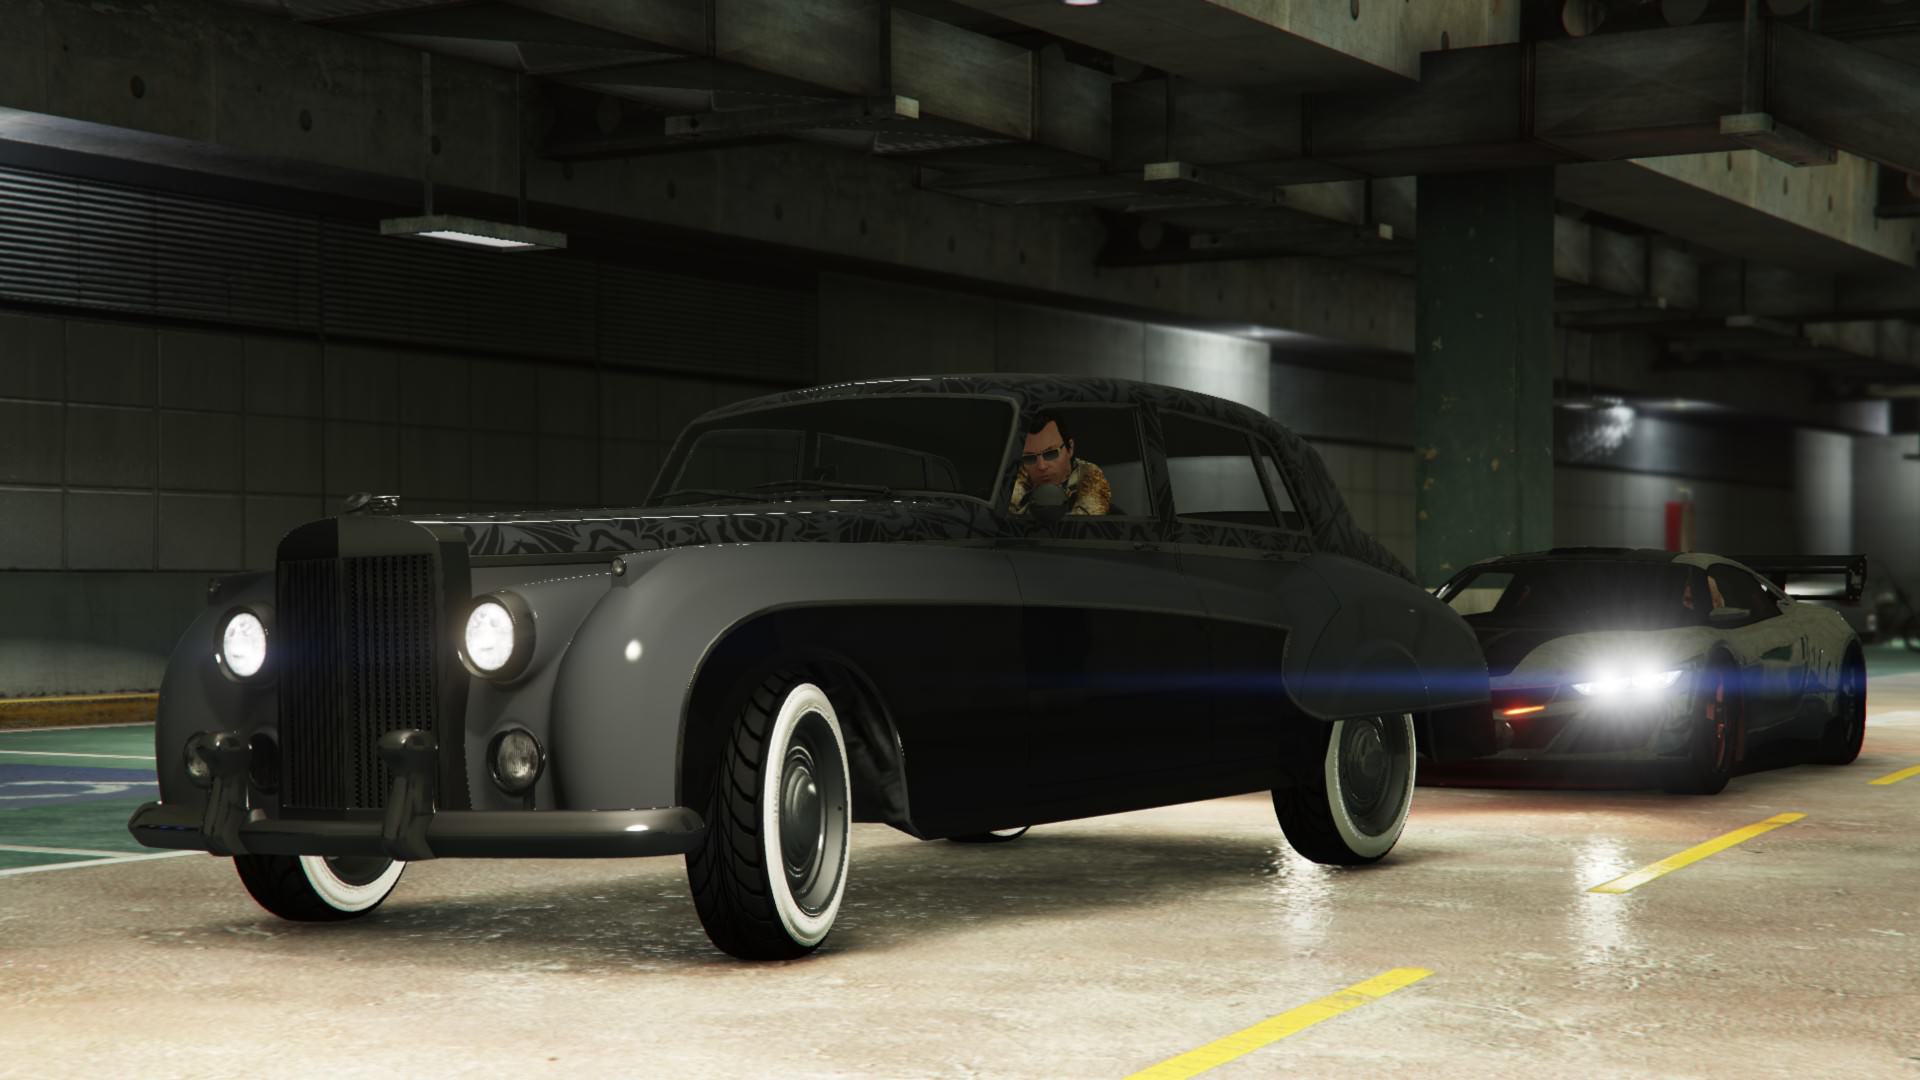 An SPD Sneak on the hidden vehicles in the After Hours DLC 5 (Enus Stafford)